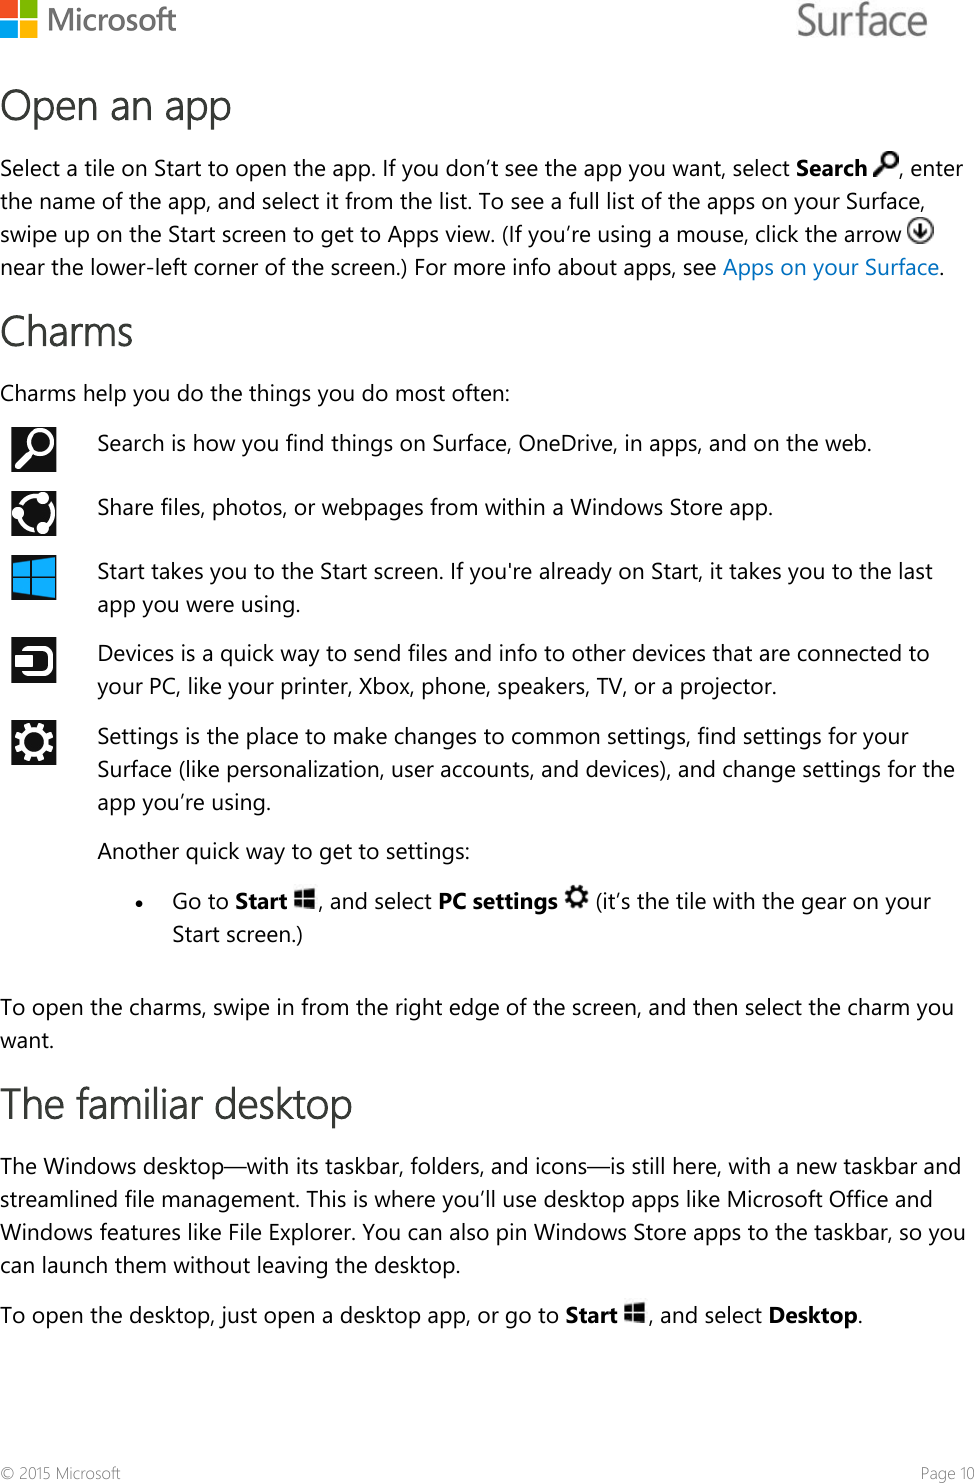    Open an app Select a tile on Start to open the app. If you don’t see the app you want, select Search , enter the name of the app, and select it from the list. To see a full list of the apps on your Surface, swipe up on the Start screen to get to Apps view. (If you’re using a mouse, click the arrow   near the lower-left corner of the screen.) For more info about apps, see Apps on your Surface. Charms Charms help you do the things you do most often:  Search is how you find things on Surface, OneDrive, in apps, and on the web.  Share files, photos, or webpages from within a Windows Store app.  Start takes you to the Start screen. If you&apos;re already on Start, it takes you to the last app you were using.   Devices is a quick way to send files and info to other devices that are connected to your PC, like your printer, Xbox, phone, speakers, TV, or a projector.  Settings is the place to make changes to common settings, find settings for your Surface (like personalization, user accounts, and devices), and change settings for the app you’re using. Another quick way to get to settings:  • Go to Start , and select PC settings   (it’s the tile with the gear on your Start screen.)  To open the charms, swipe in from the right edge of the screen, and then select the charm you want.  The familiar desktop The Windows desktop—with its taskbar, folders, and icons—is still here, with a new taskbar and streamlined file management. This is where you’ll use desktop apps like Microsoft Office and Windows features like File Explorer. You can also pin Windows Store apps to the taskbar, so you can launch them without leaving the desktop.  To open the desktop, just open a desktop app, or go to Start , and select Desktop. © 2015 Microsoft    Page 10 